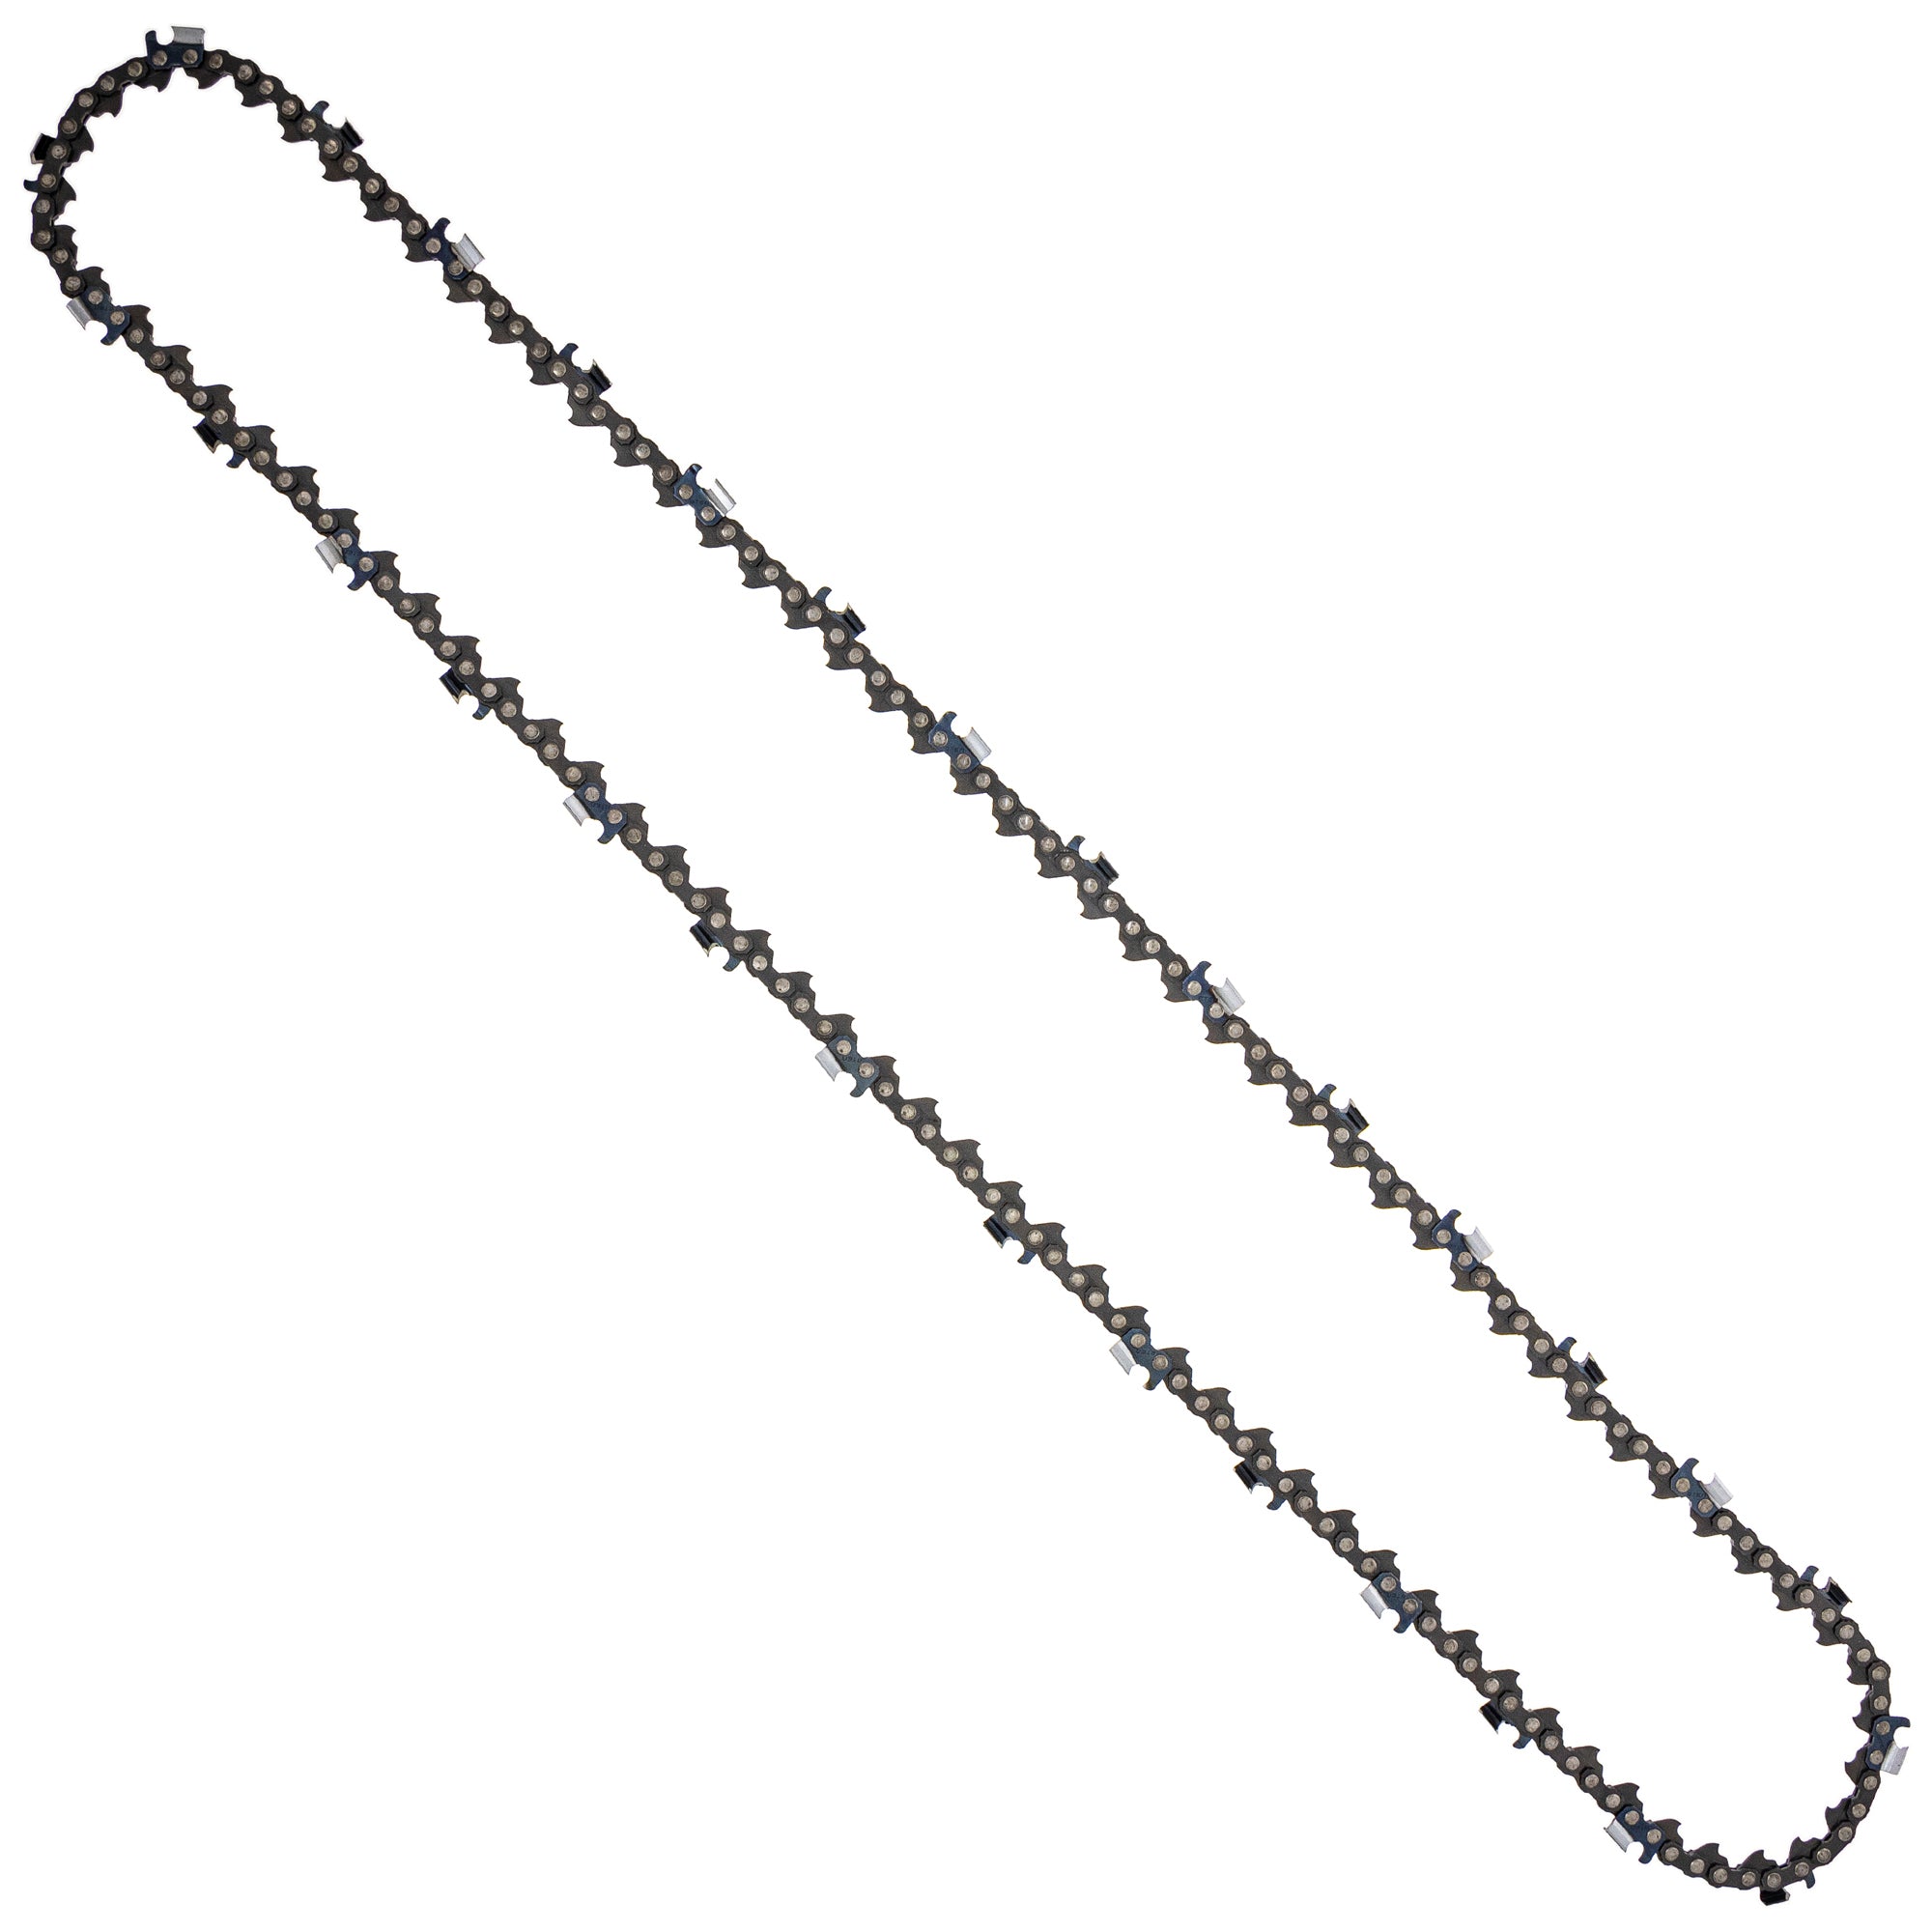 8TEN 810-CCC2430H Chain 6-Pack for zOTHER Oregon MS 066 064 056